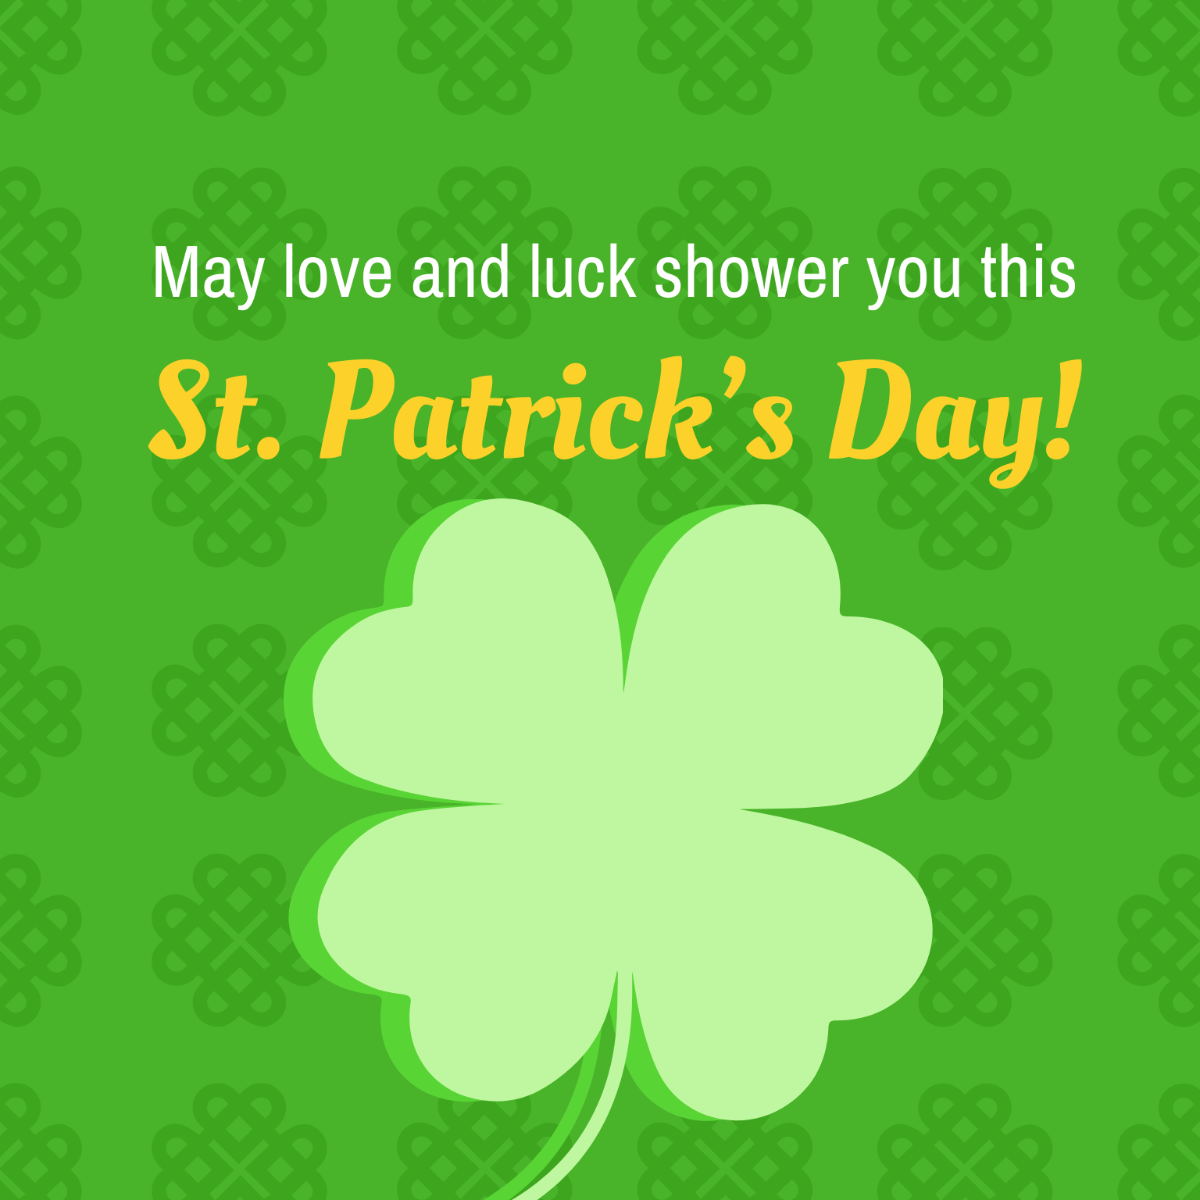 Free St. Patrick's Day Wishes Vector Template